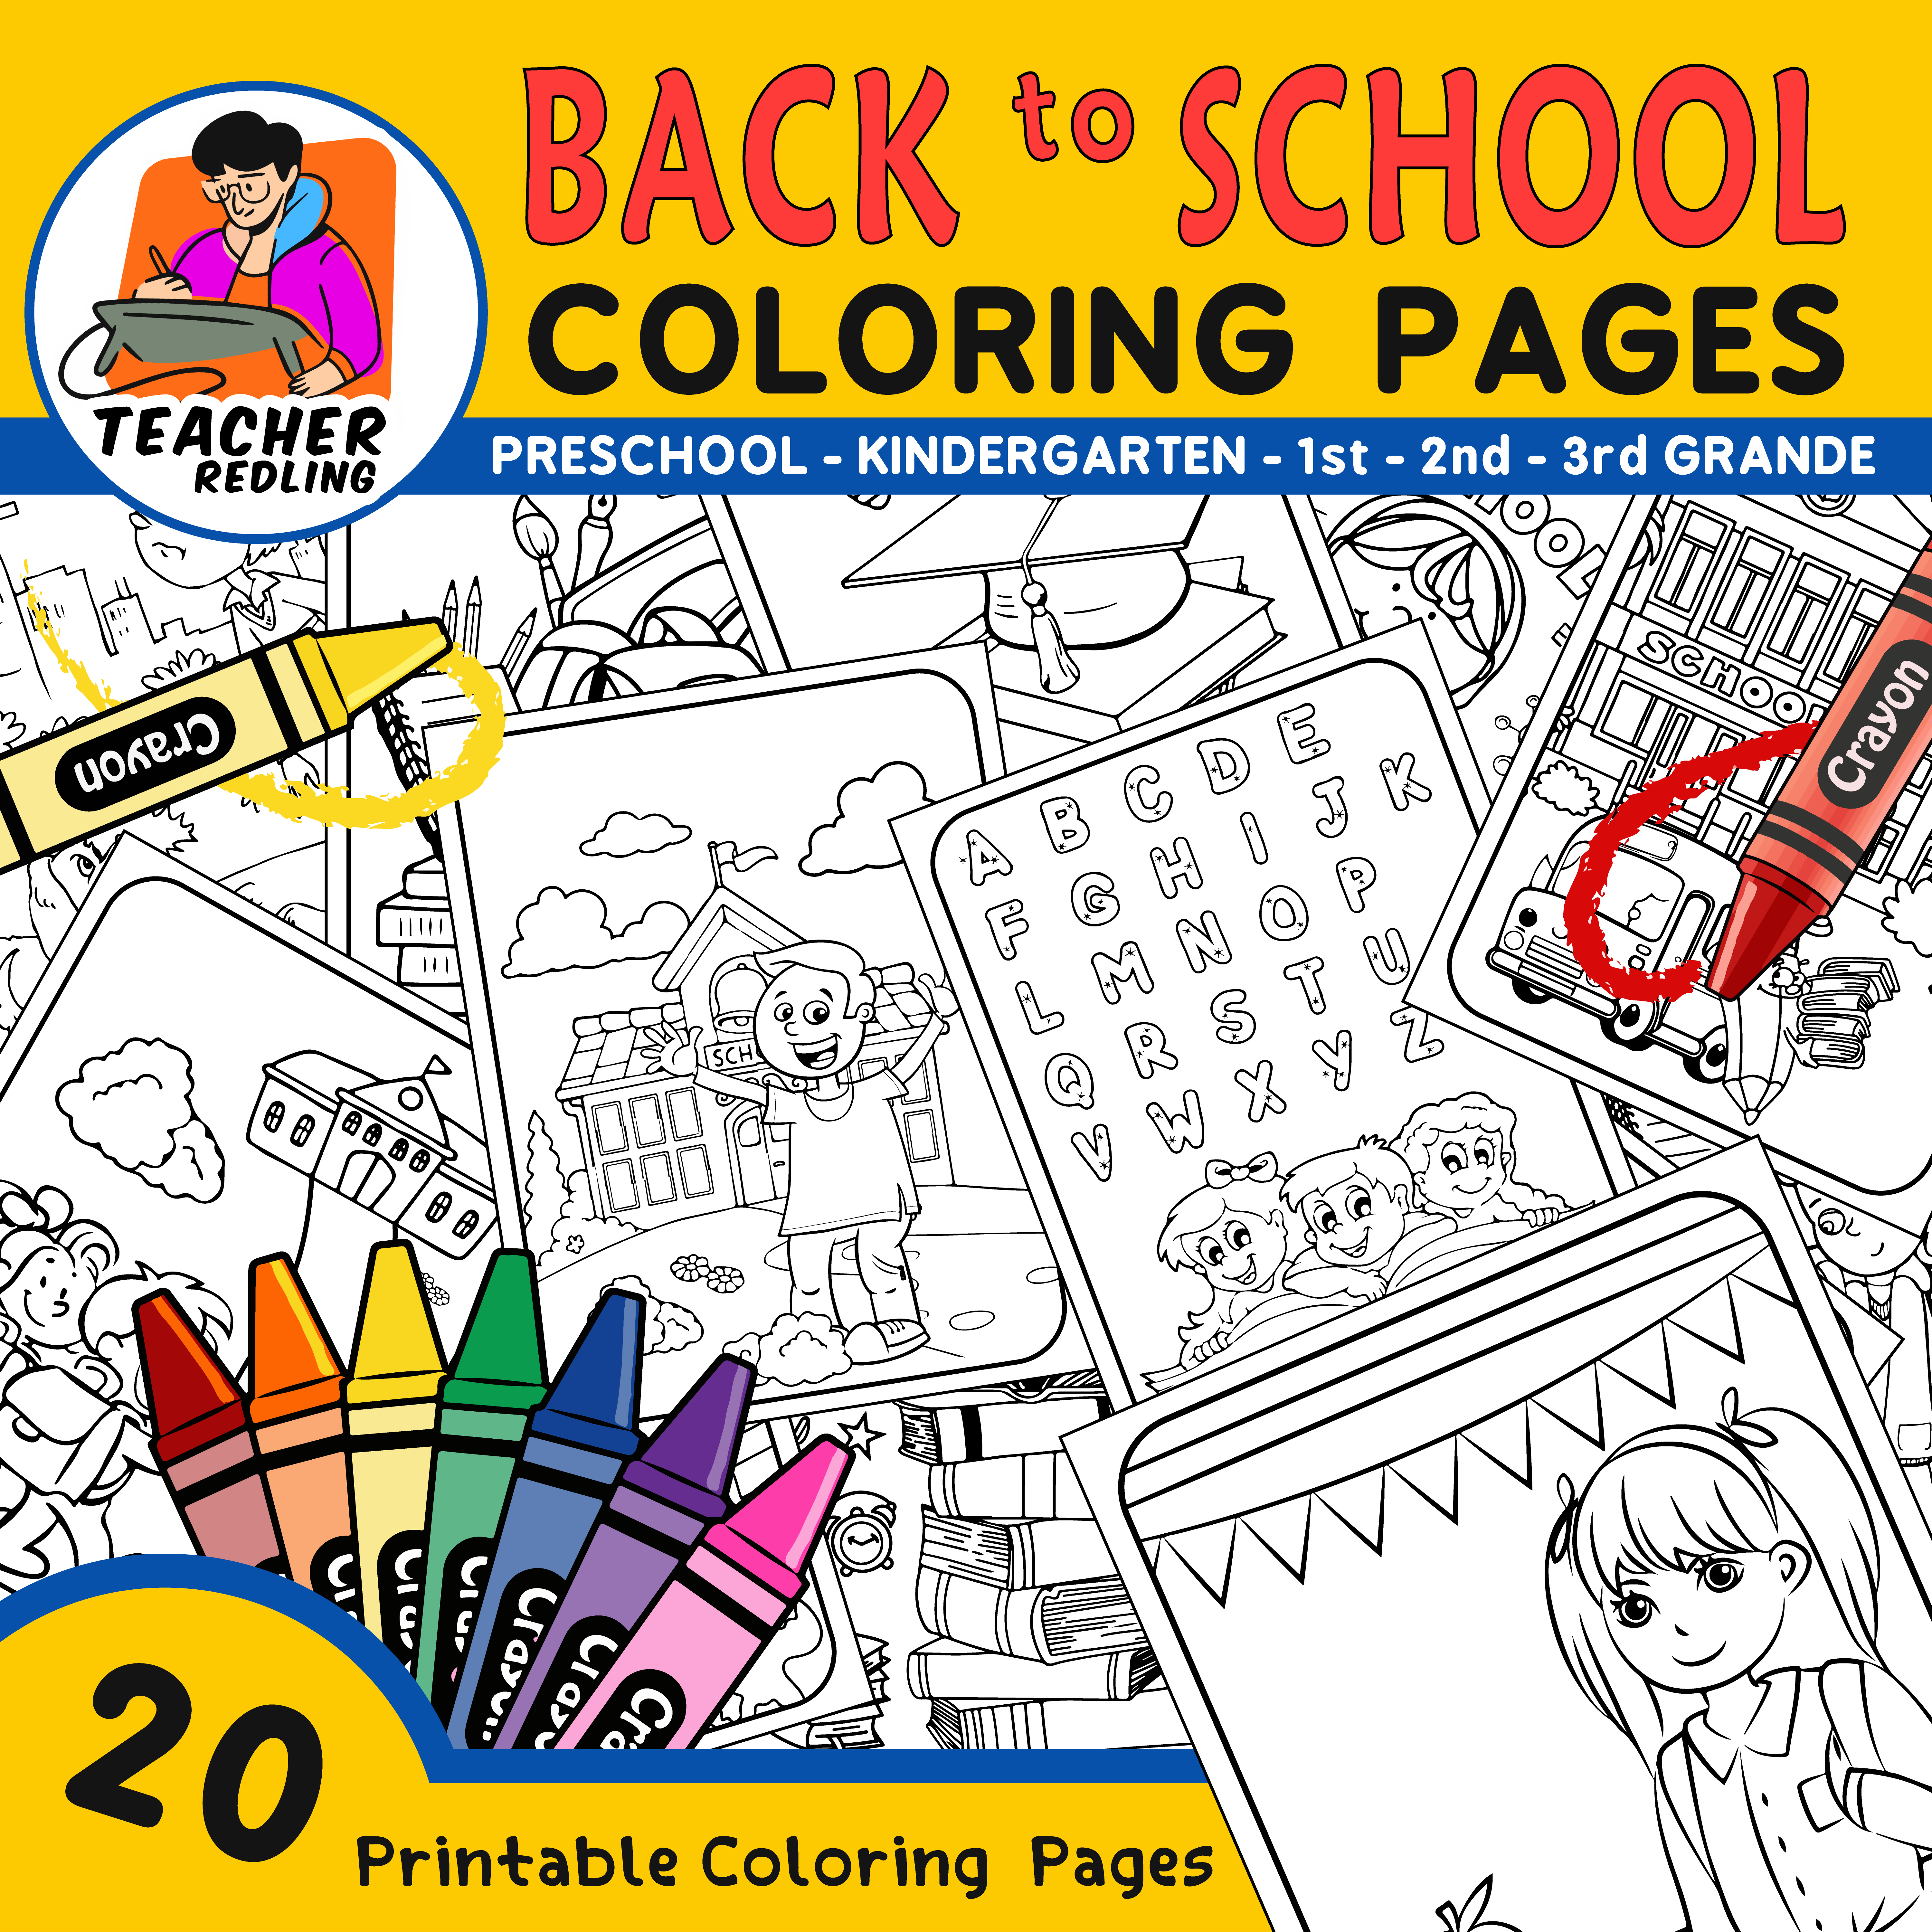 Wele back to school coloring pages for preschool kindergarten st nd rd made by teachers